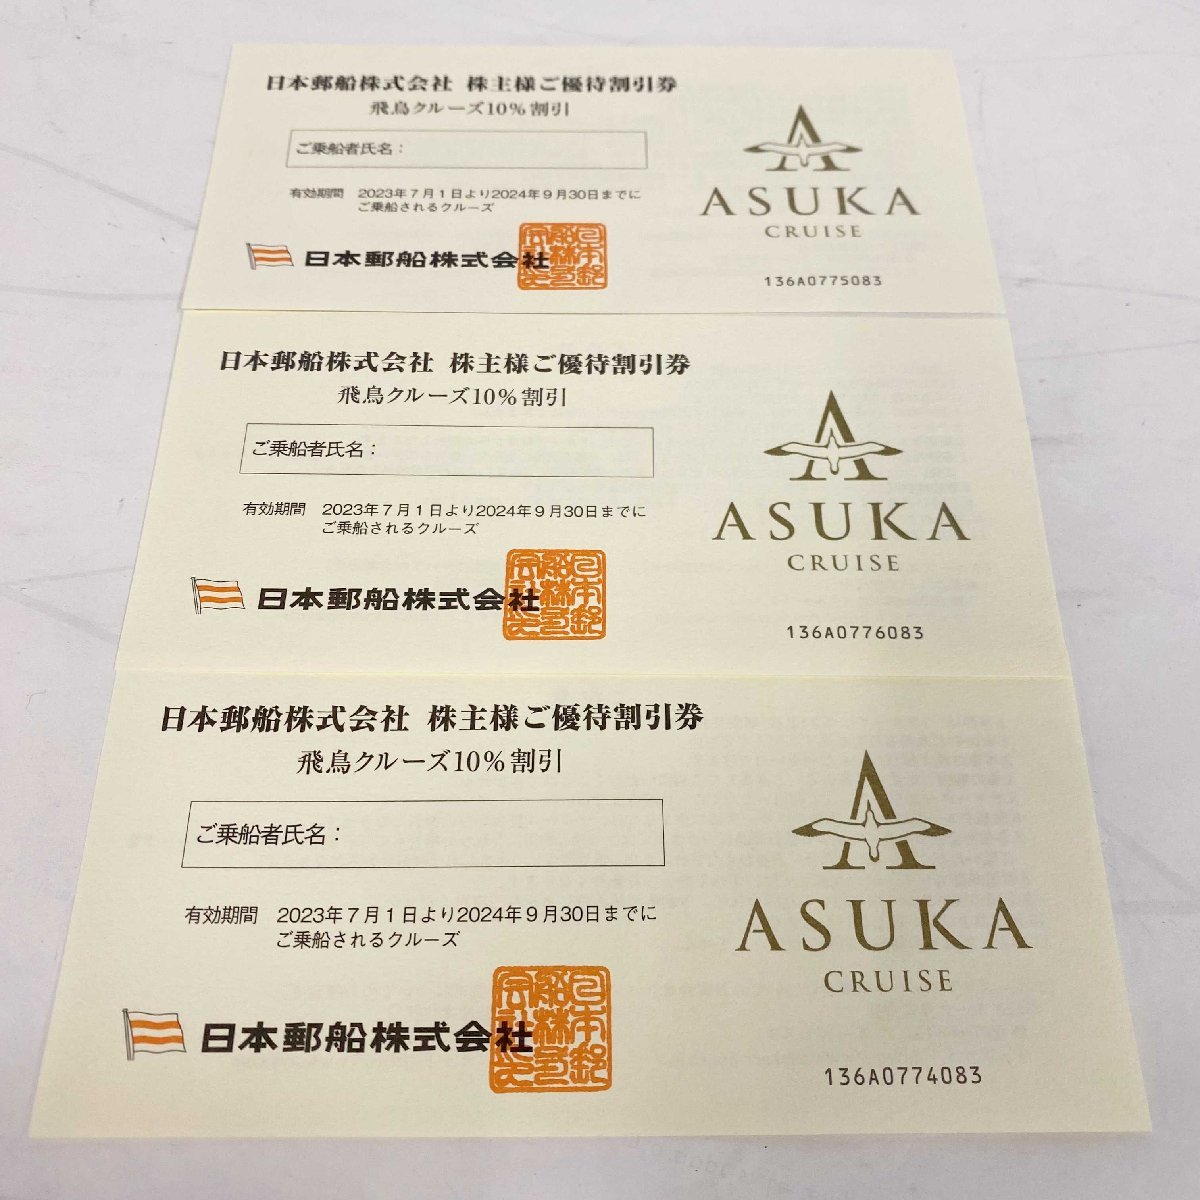  Japan . boat corporation stockholder complimentary ticket three pieces set < gold certificate > discount ticket . bird cruise 10% discount ASUKA CRUISE